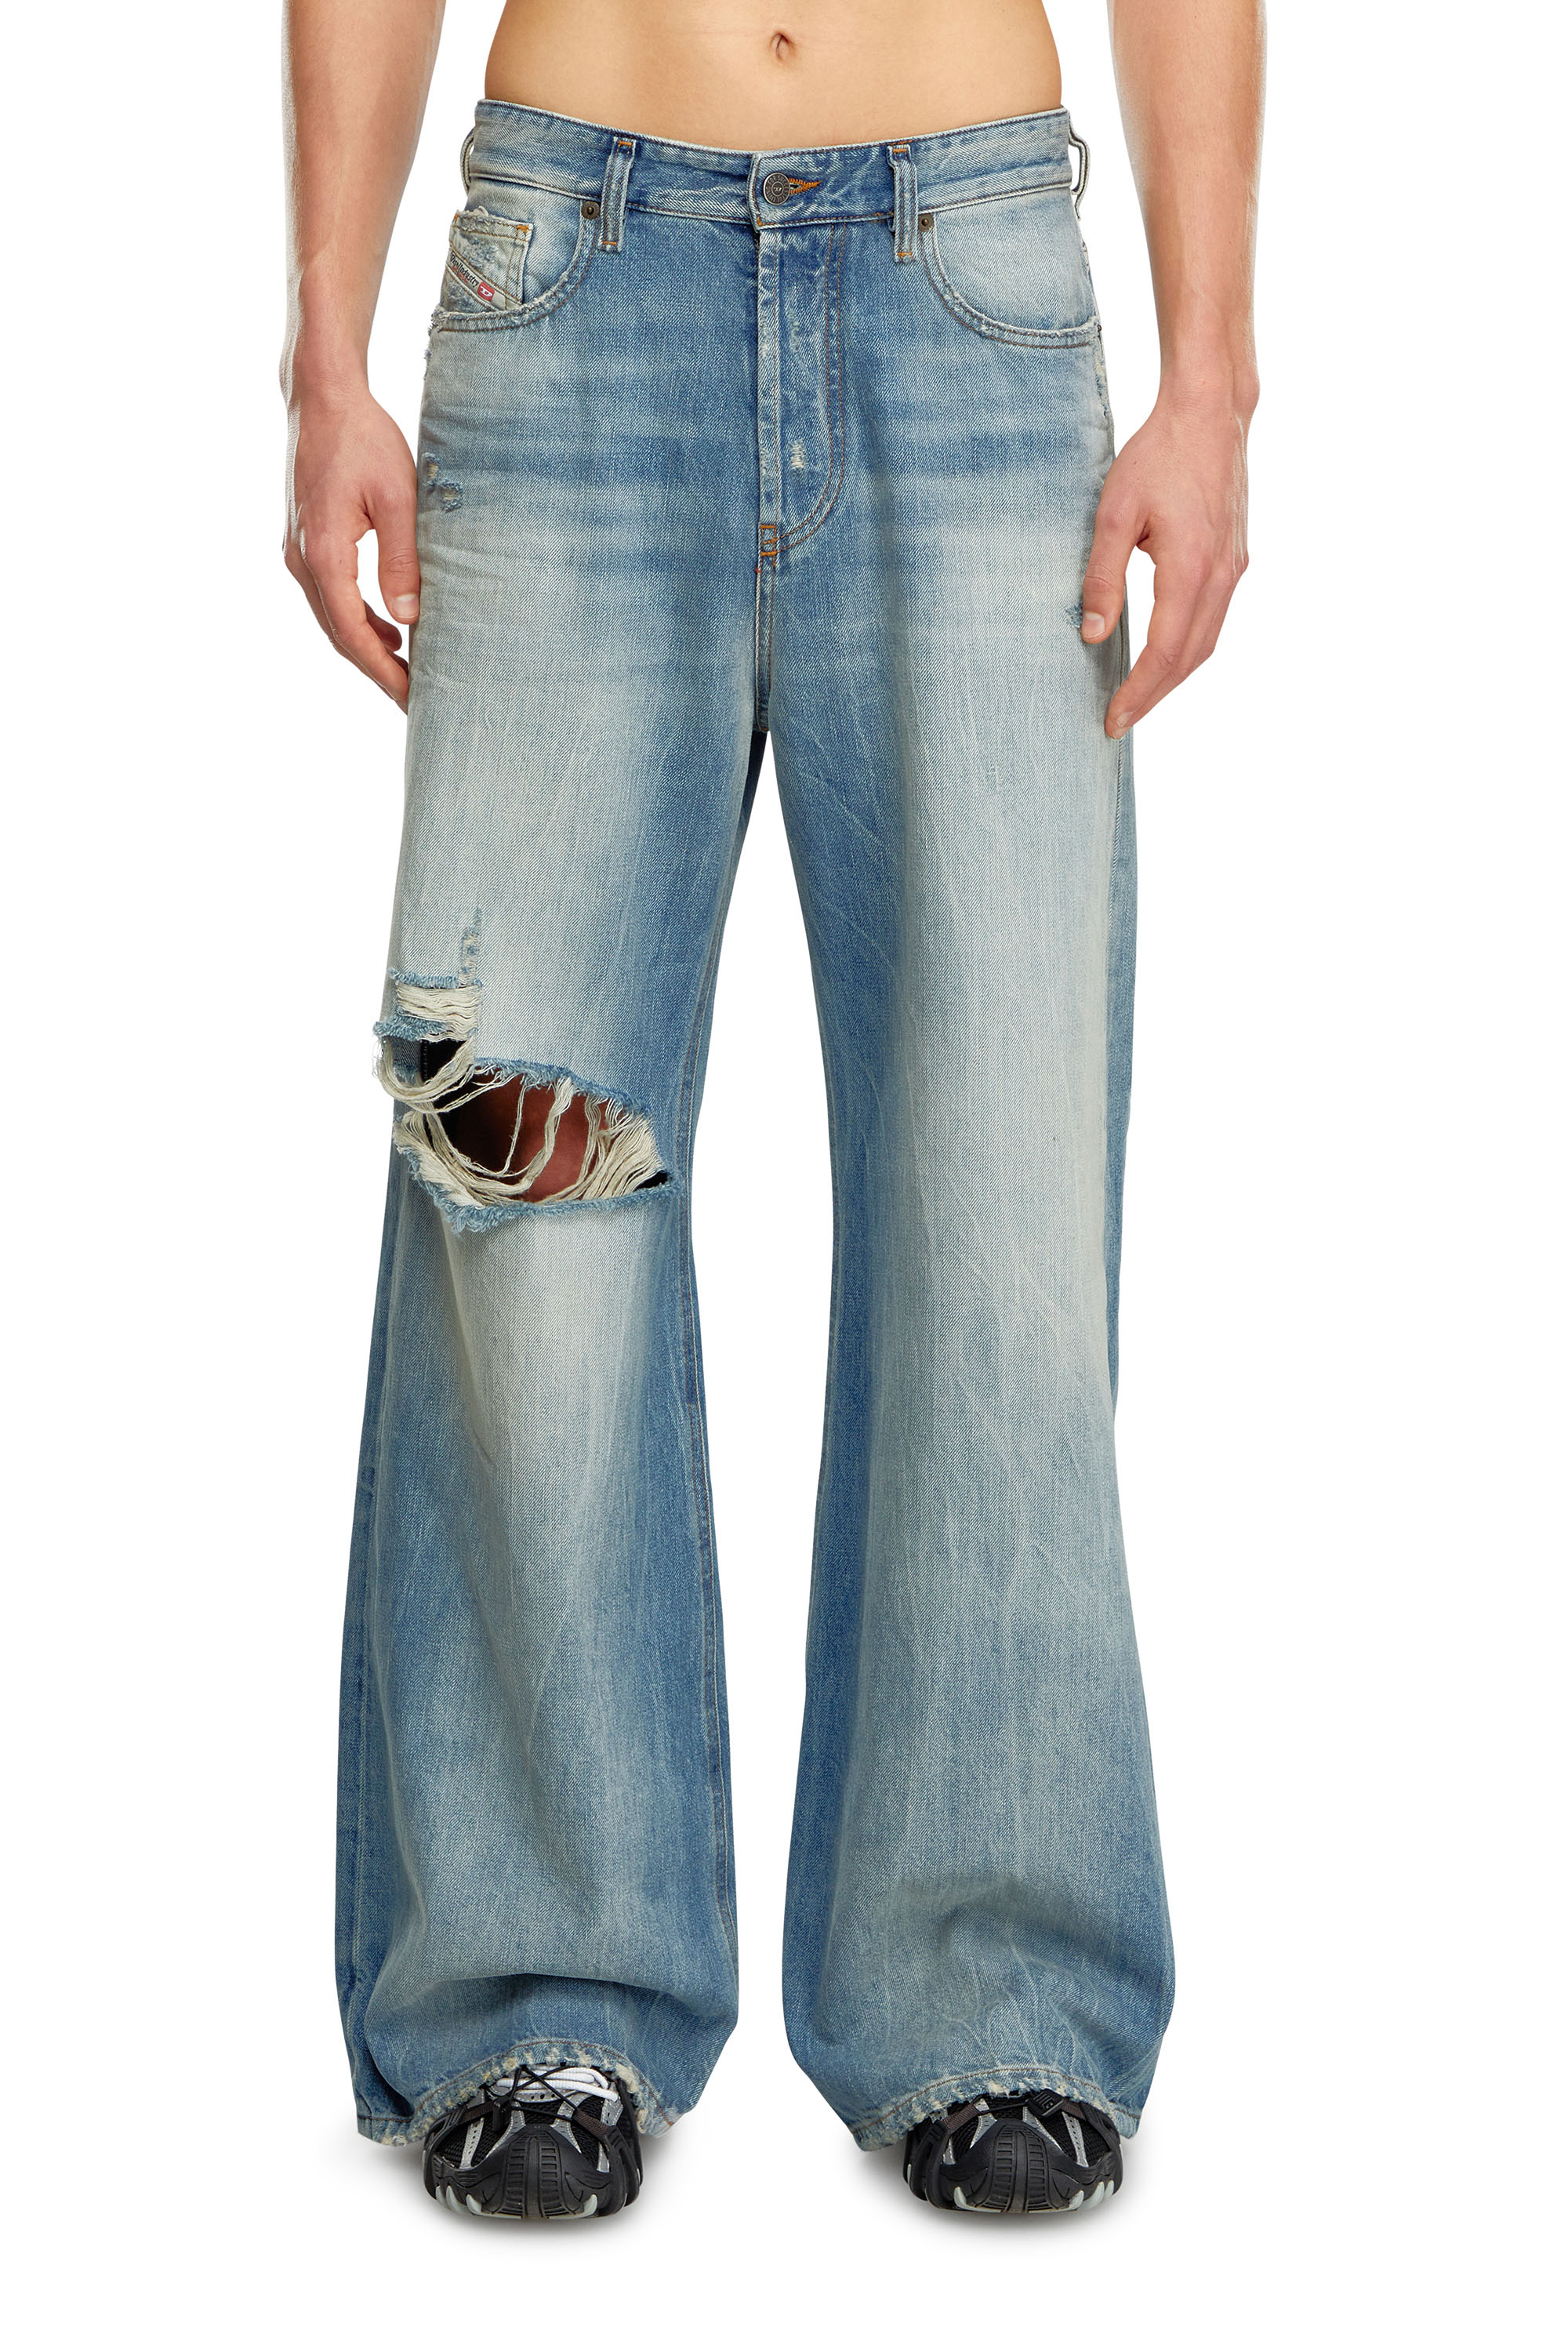 Diesel - Straight Jeans 1996 D-Sire 09H58, Mujer Straight Jeans - 1996 D-Sire in Azul marino - Image 5